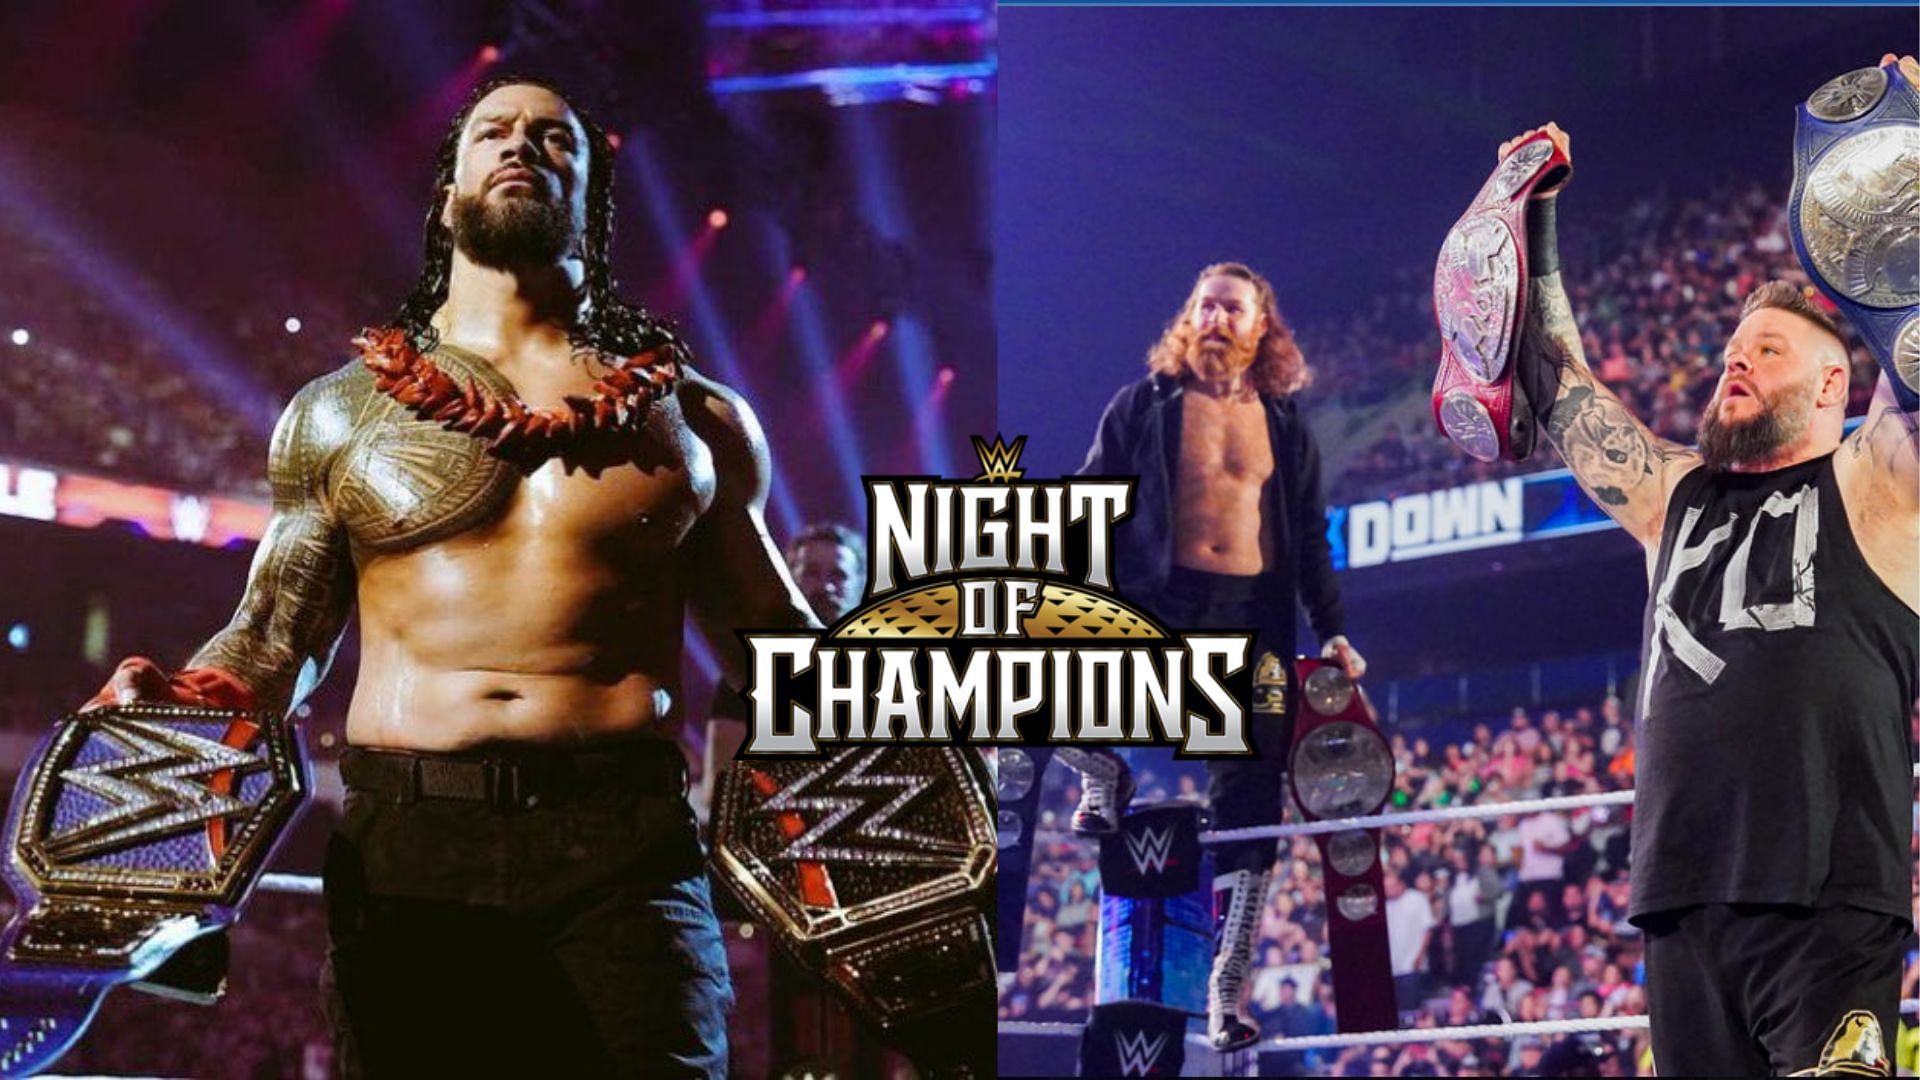 Night Of Champions 2023 will occur on Saturday, May 27